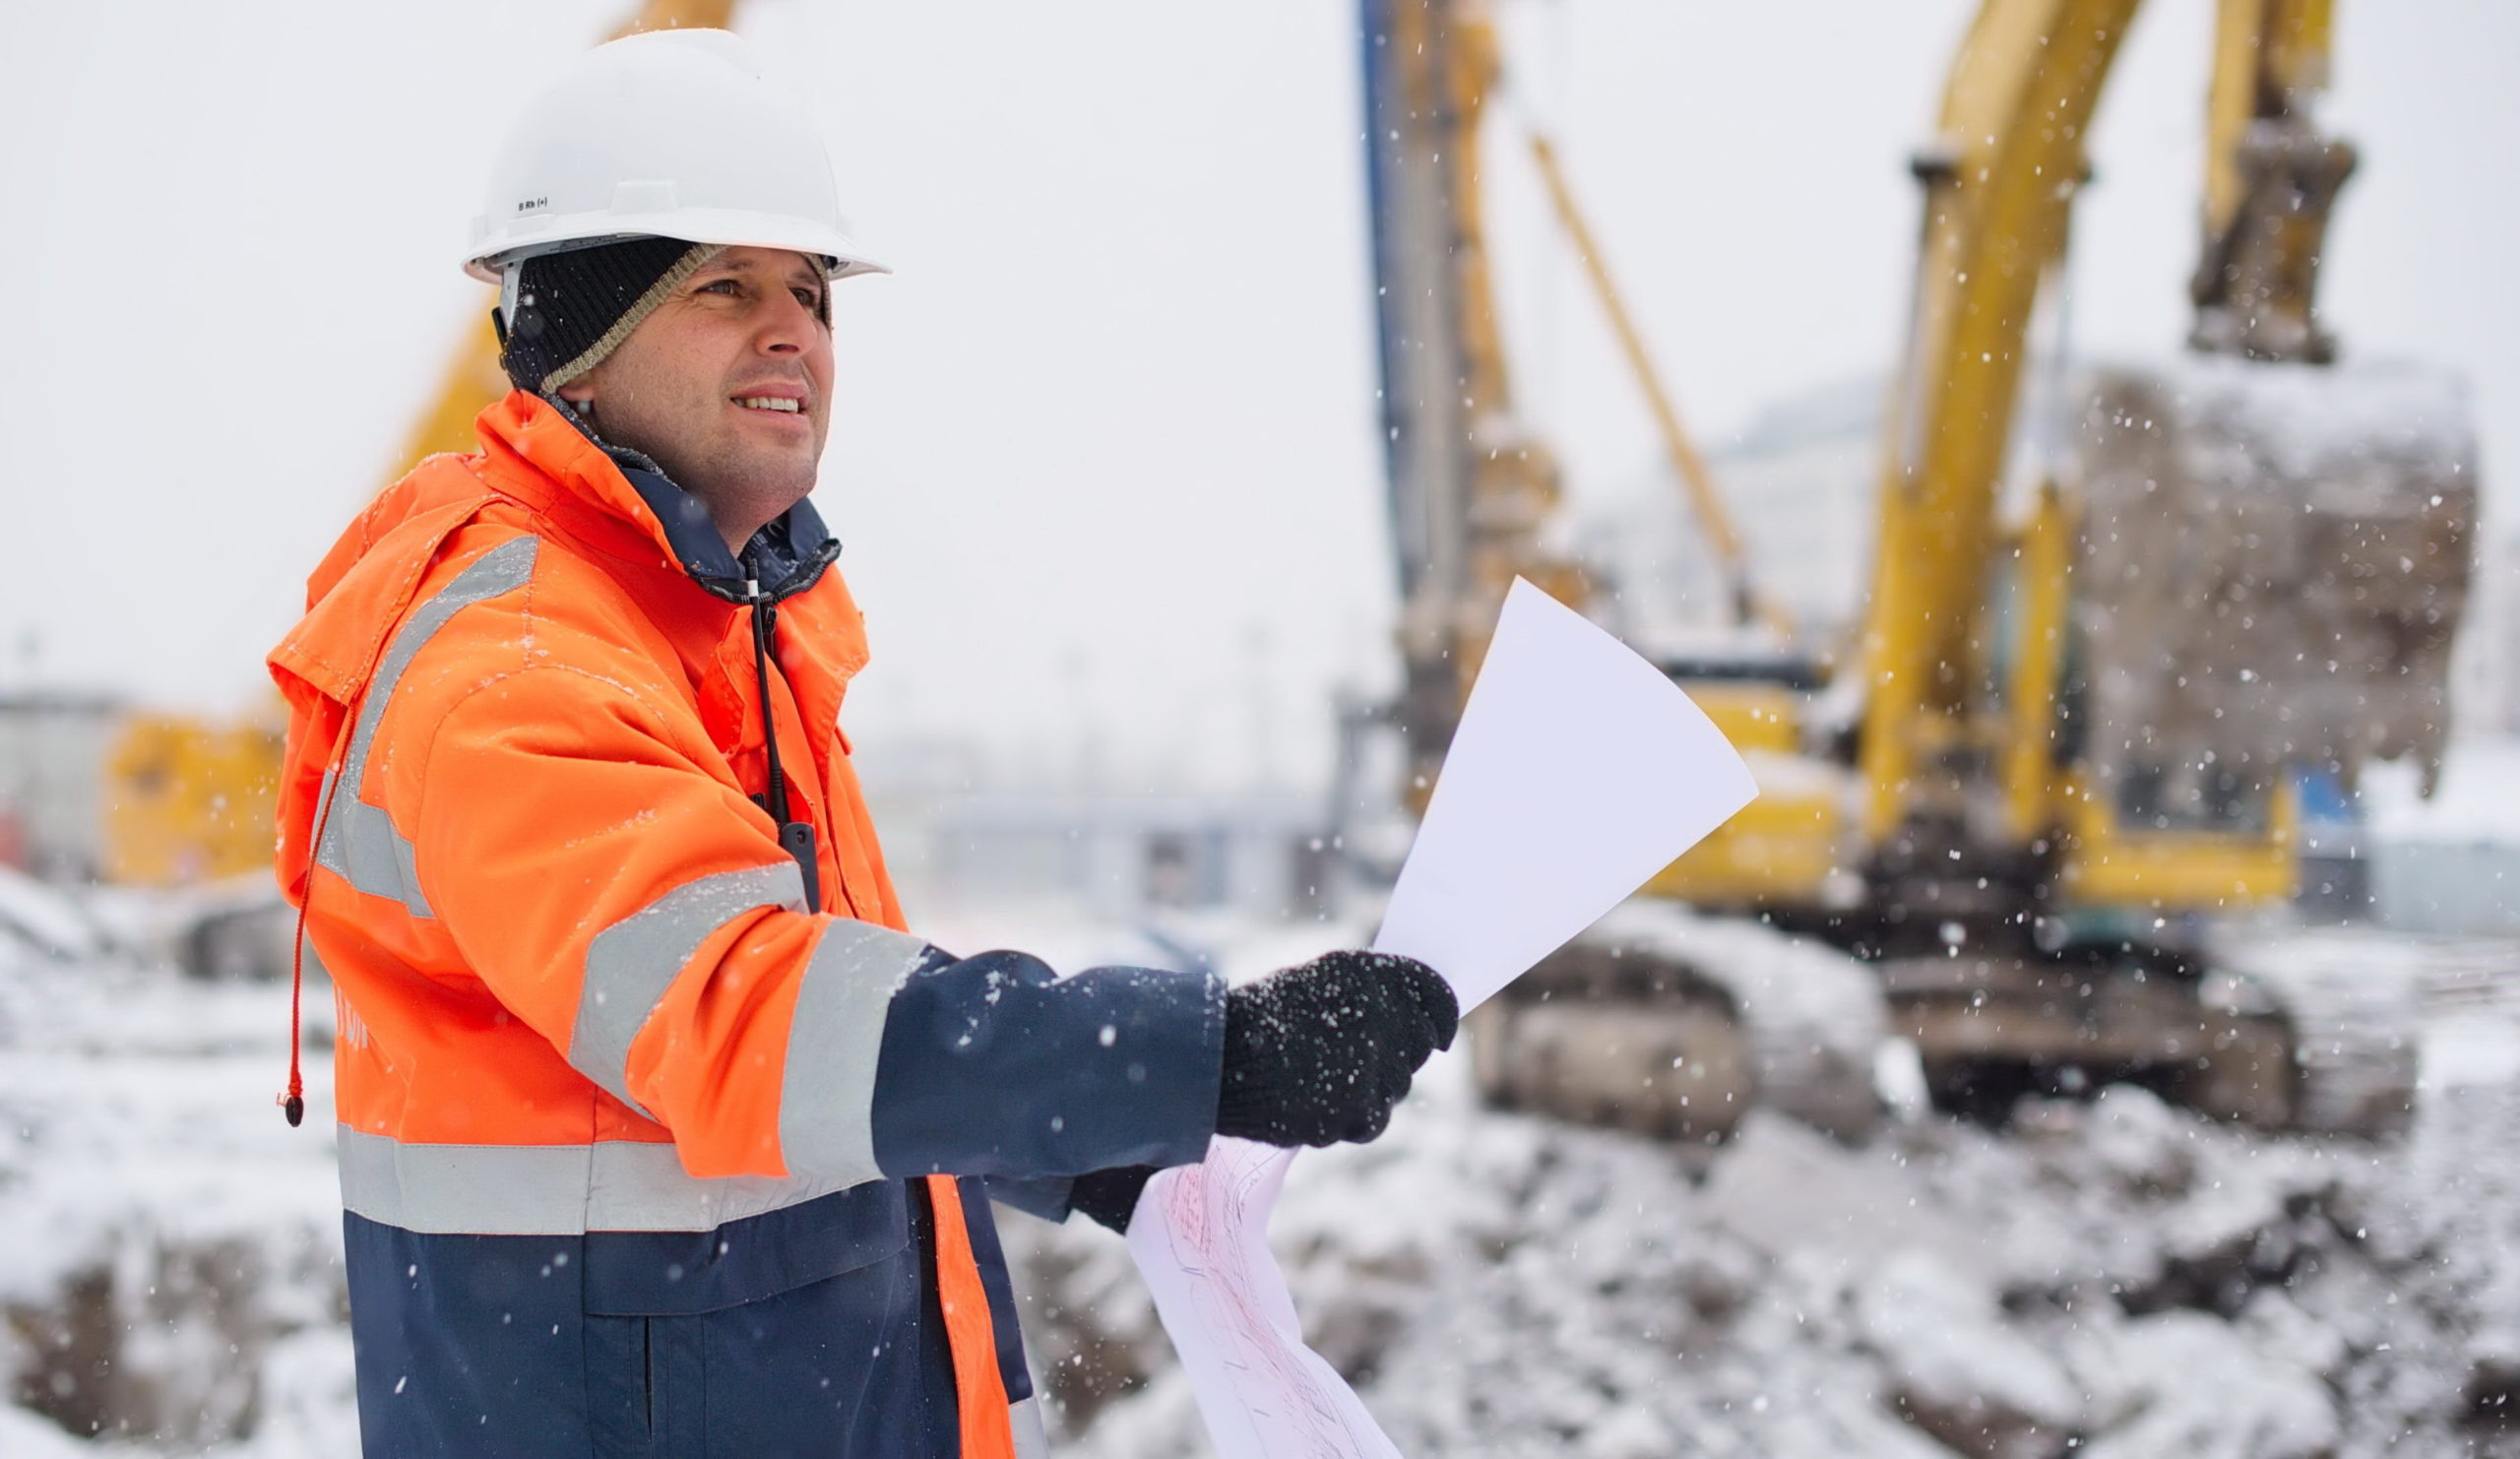 Winter Safety Stats and Resources to Keep Your Team Safe From Winter Threats